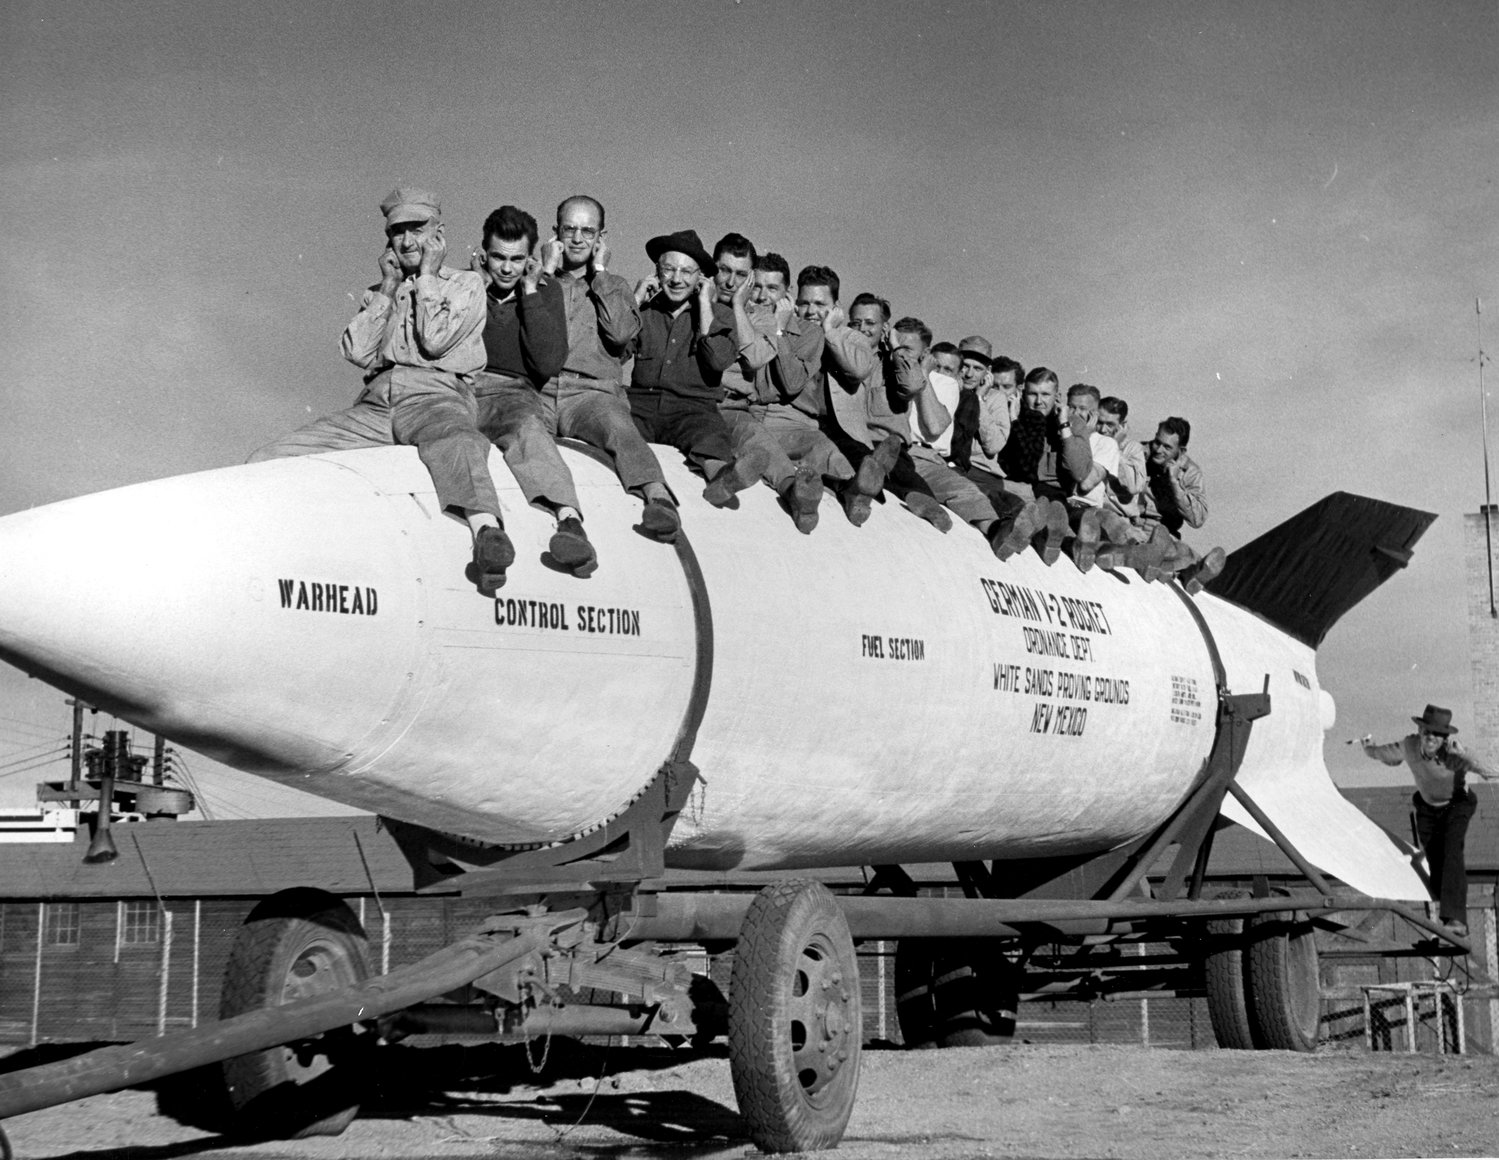 General Electric employees posing on a V-2 rocket at White Sands Proving Ground (now White Sands Missile Range) in New Mexico.